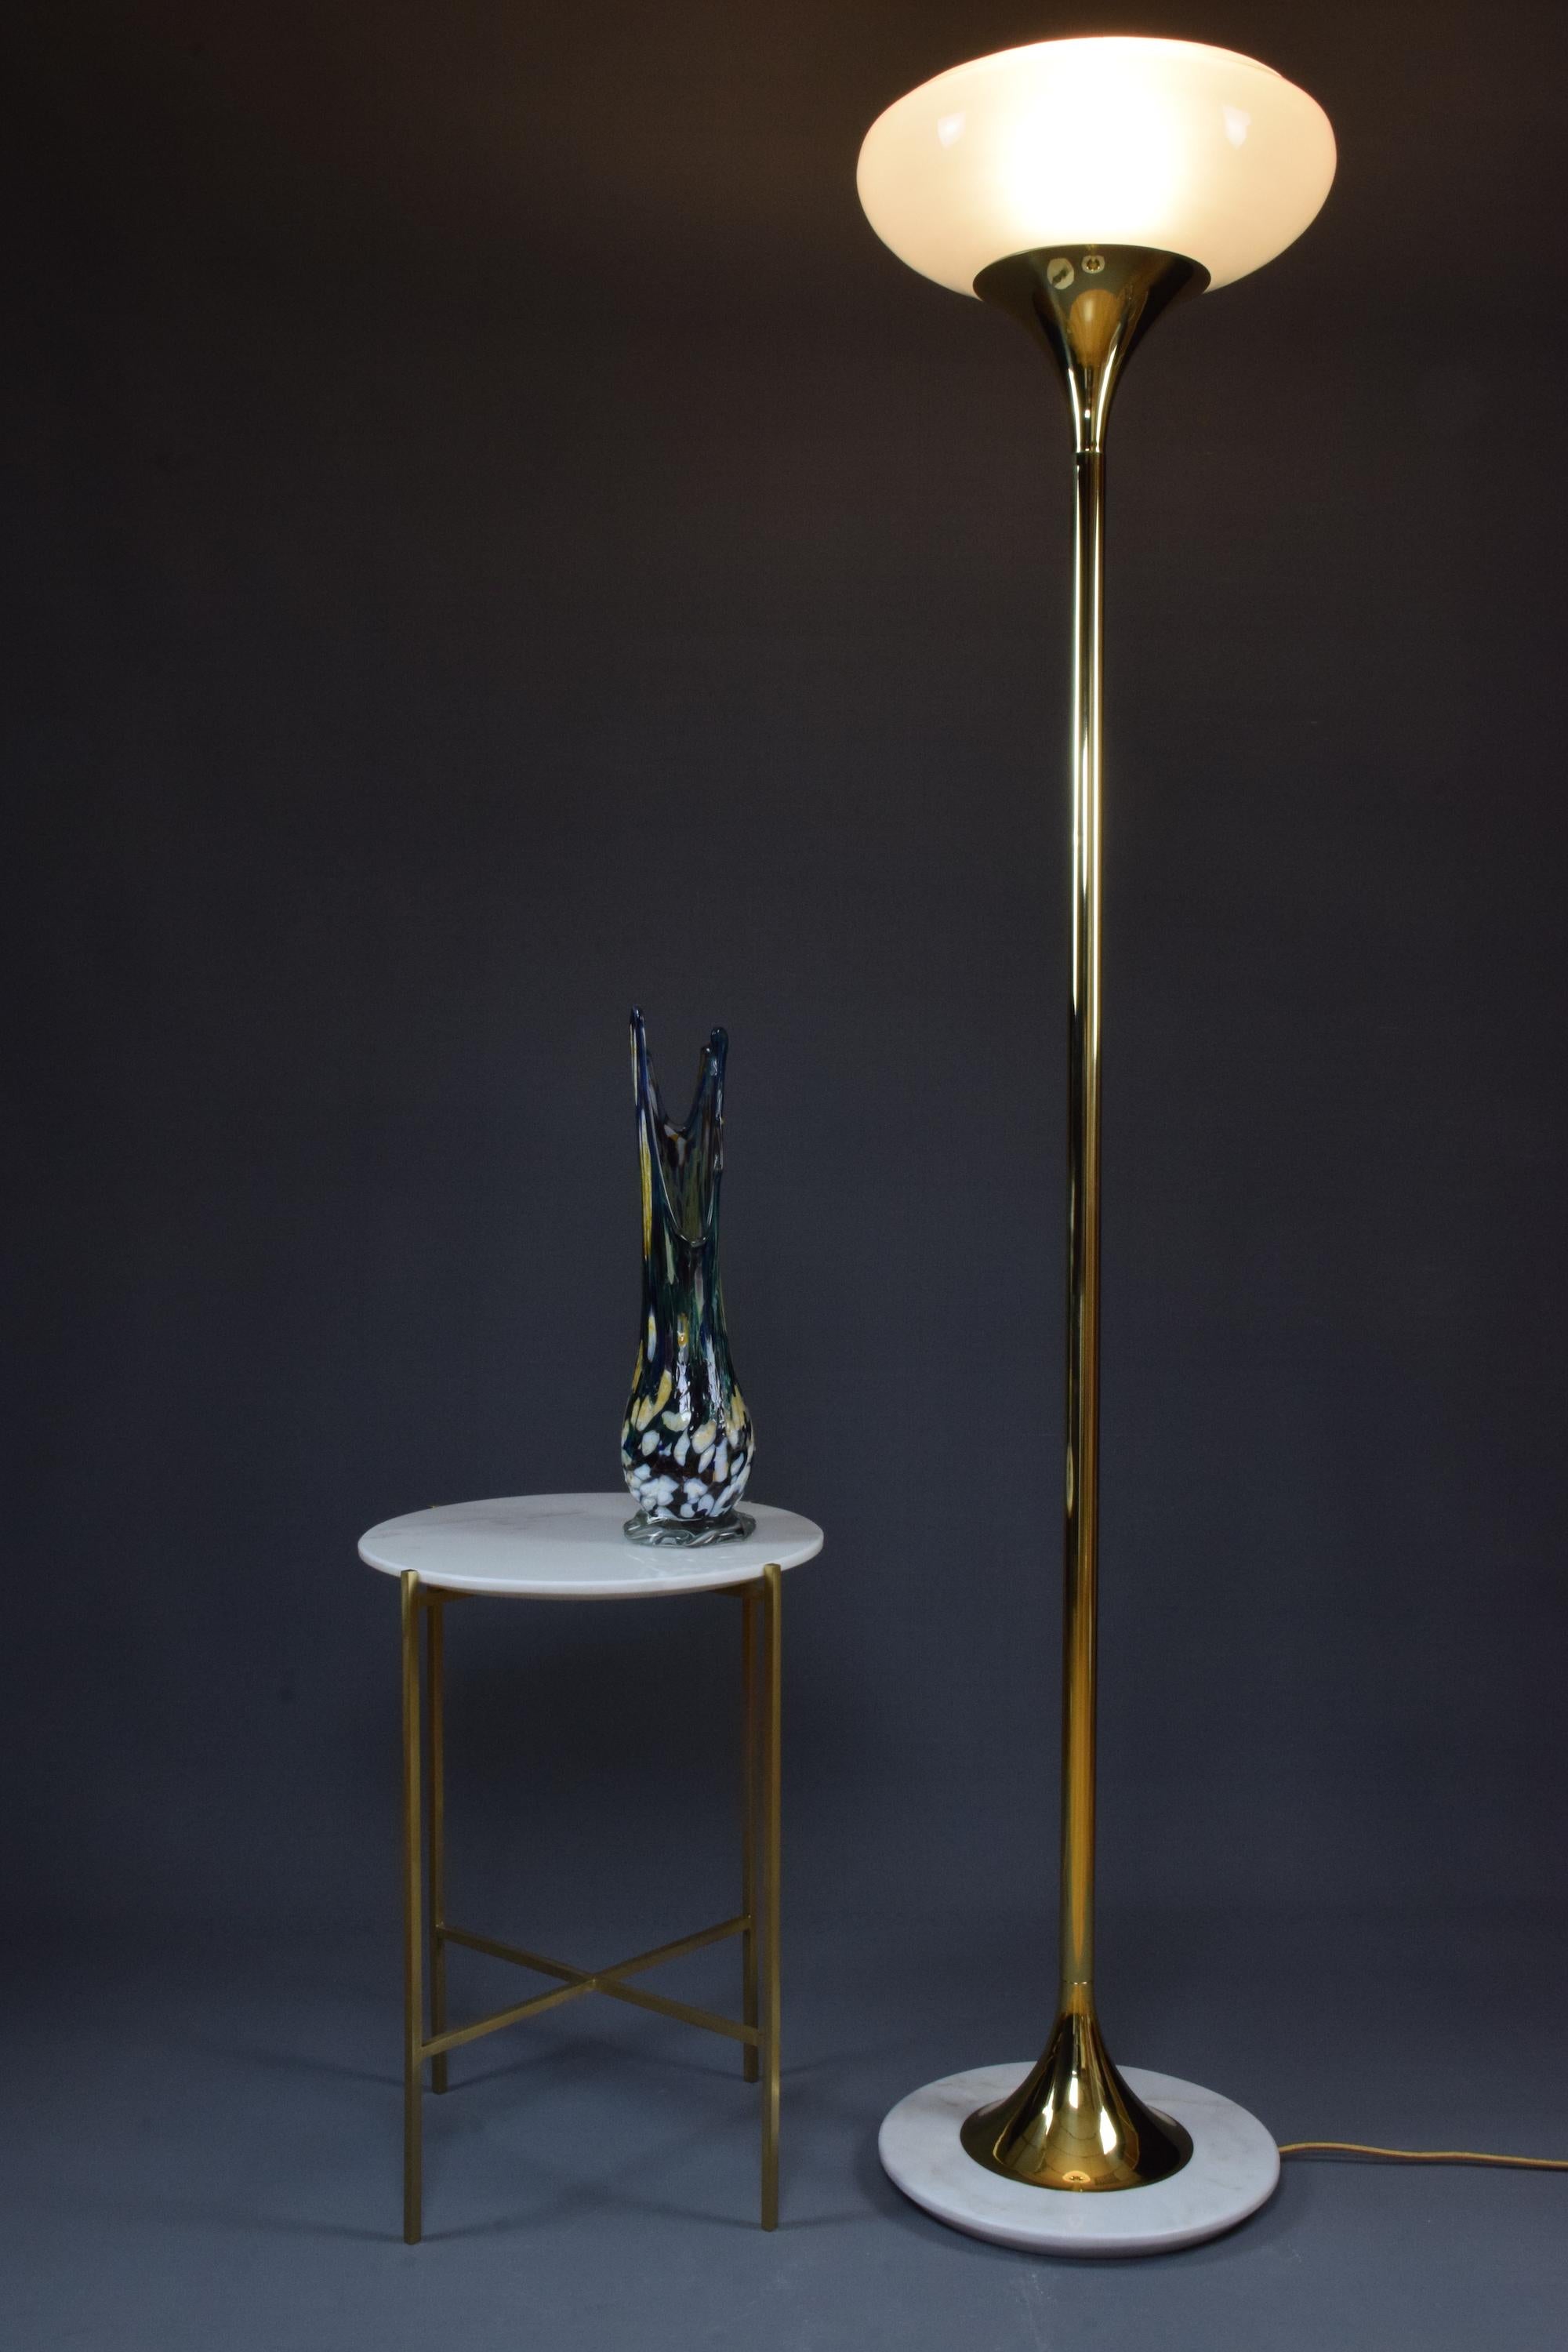 A tall light in solid brass designed with a rounded opal glass shade for a full light diffusion around the room with an open-top to also reflect the light upwards. The elegant base is available in black, green or white marble.

1x60 W Max E27
230 V